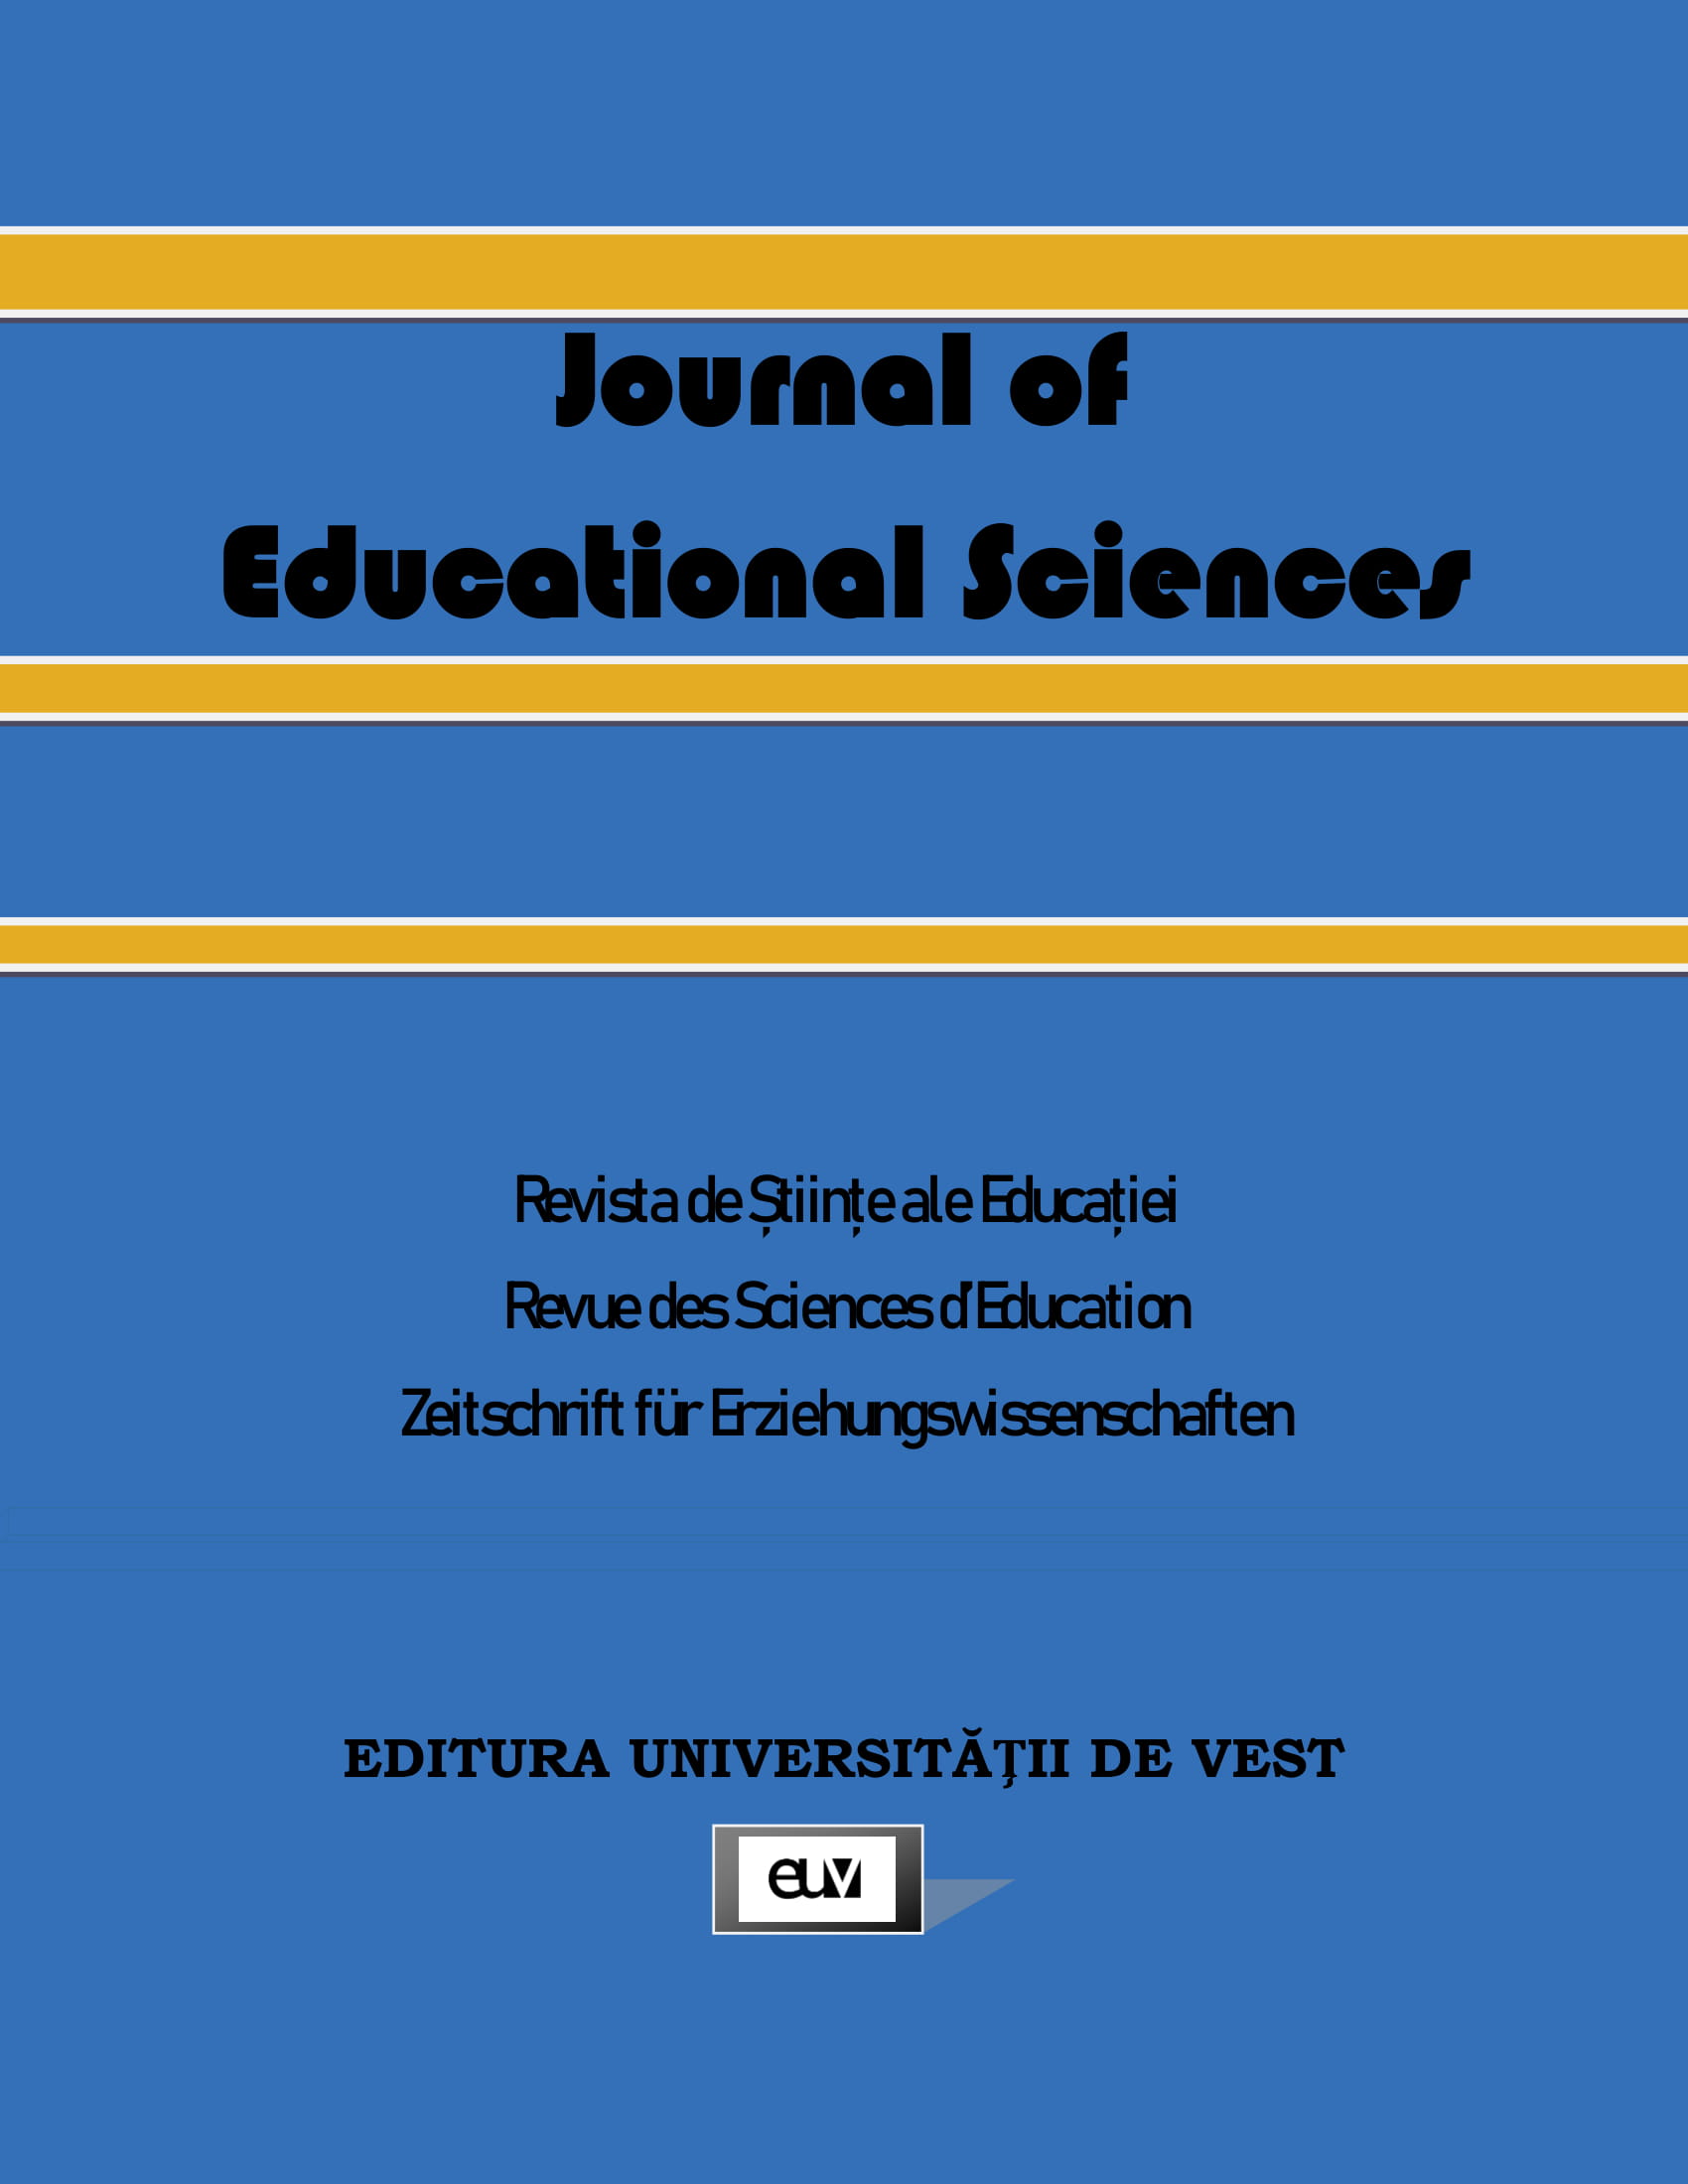 Challenges experienced by teachers regarding access to digital
instruments, resources, and competences in adapting the educational process to physical distancing measures at the onset of the COVID-19
pandemic in Romania Cover Image